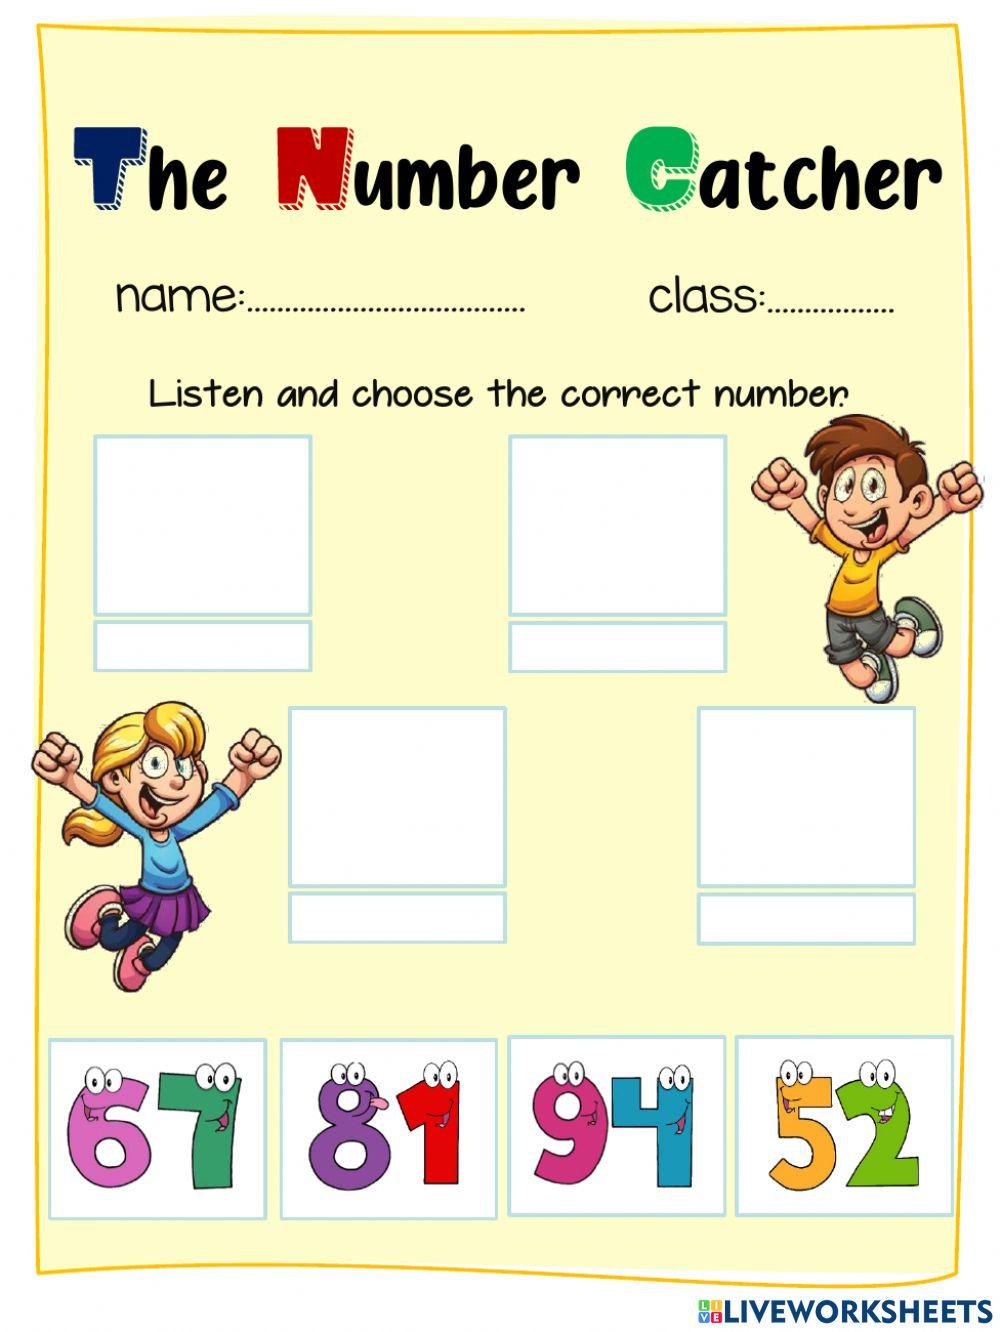 The Number Catcher